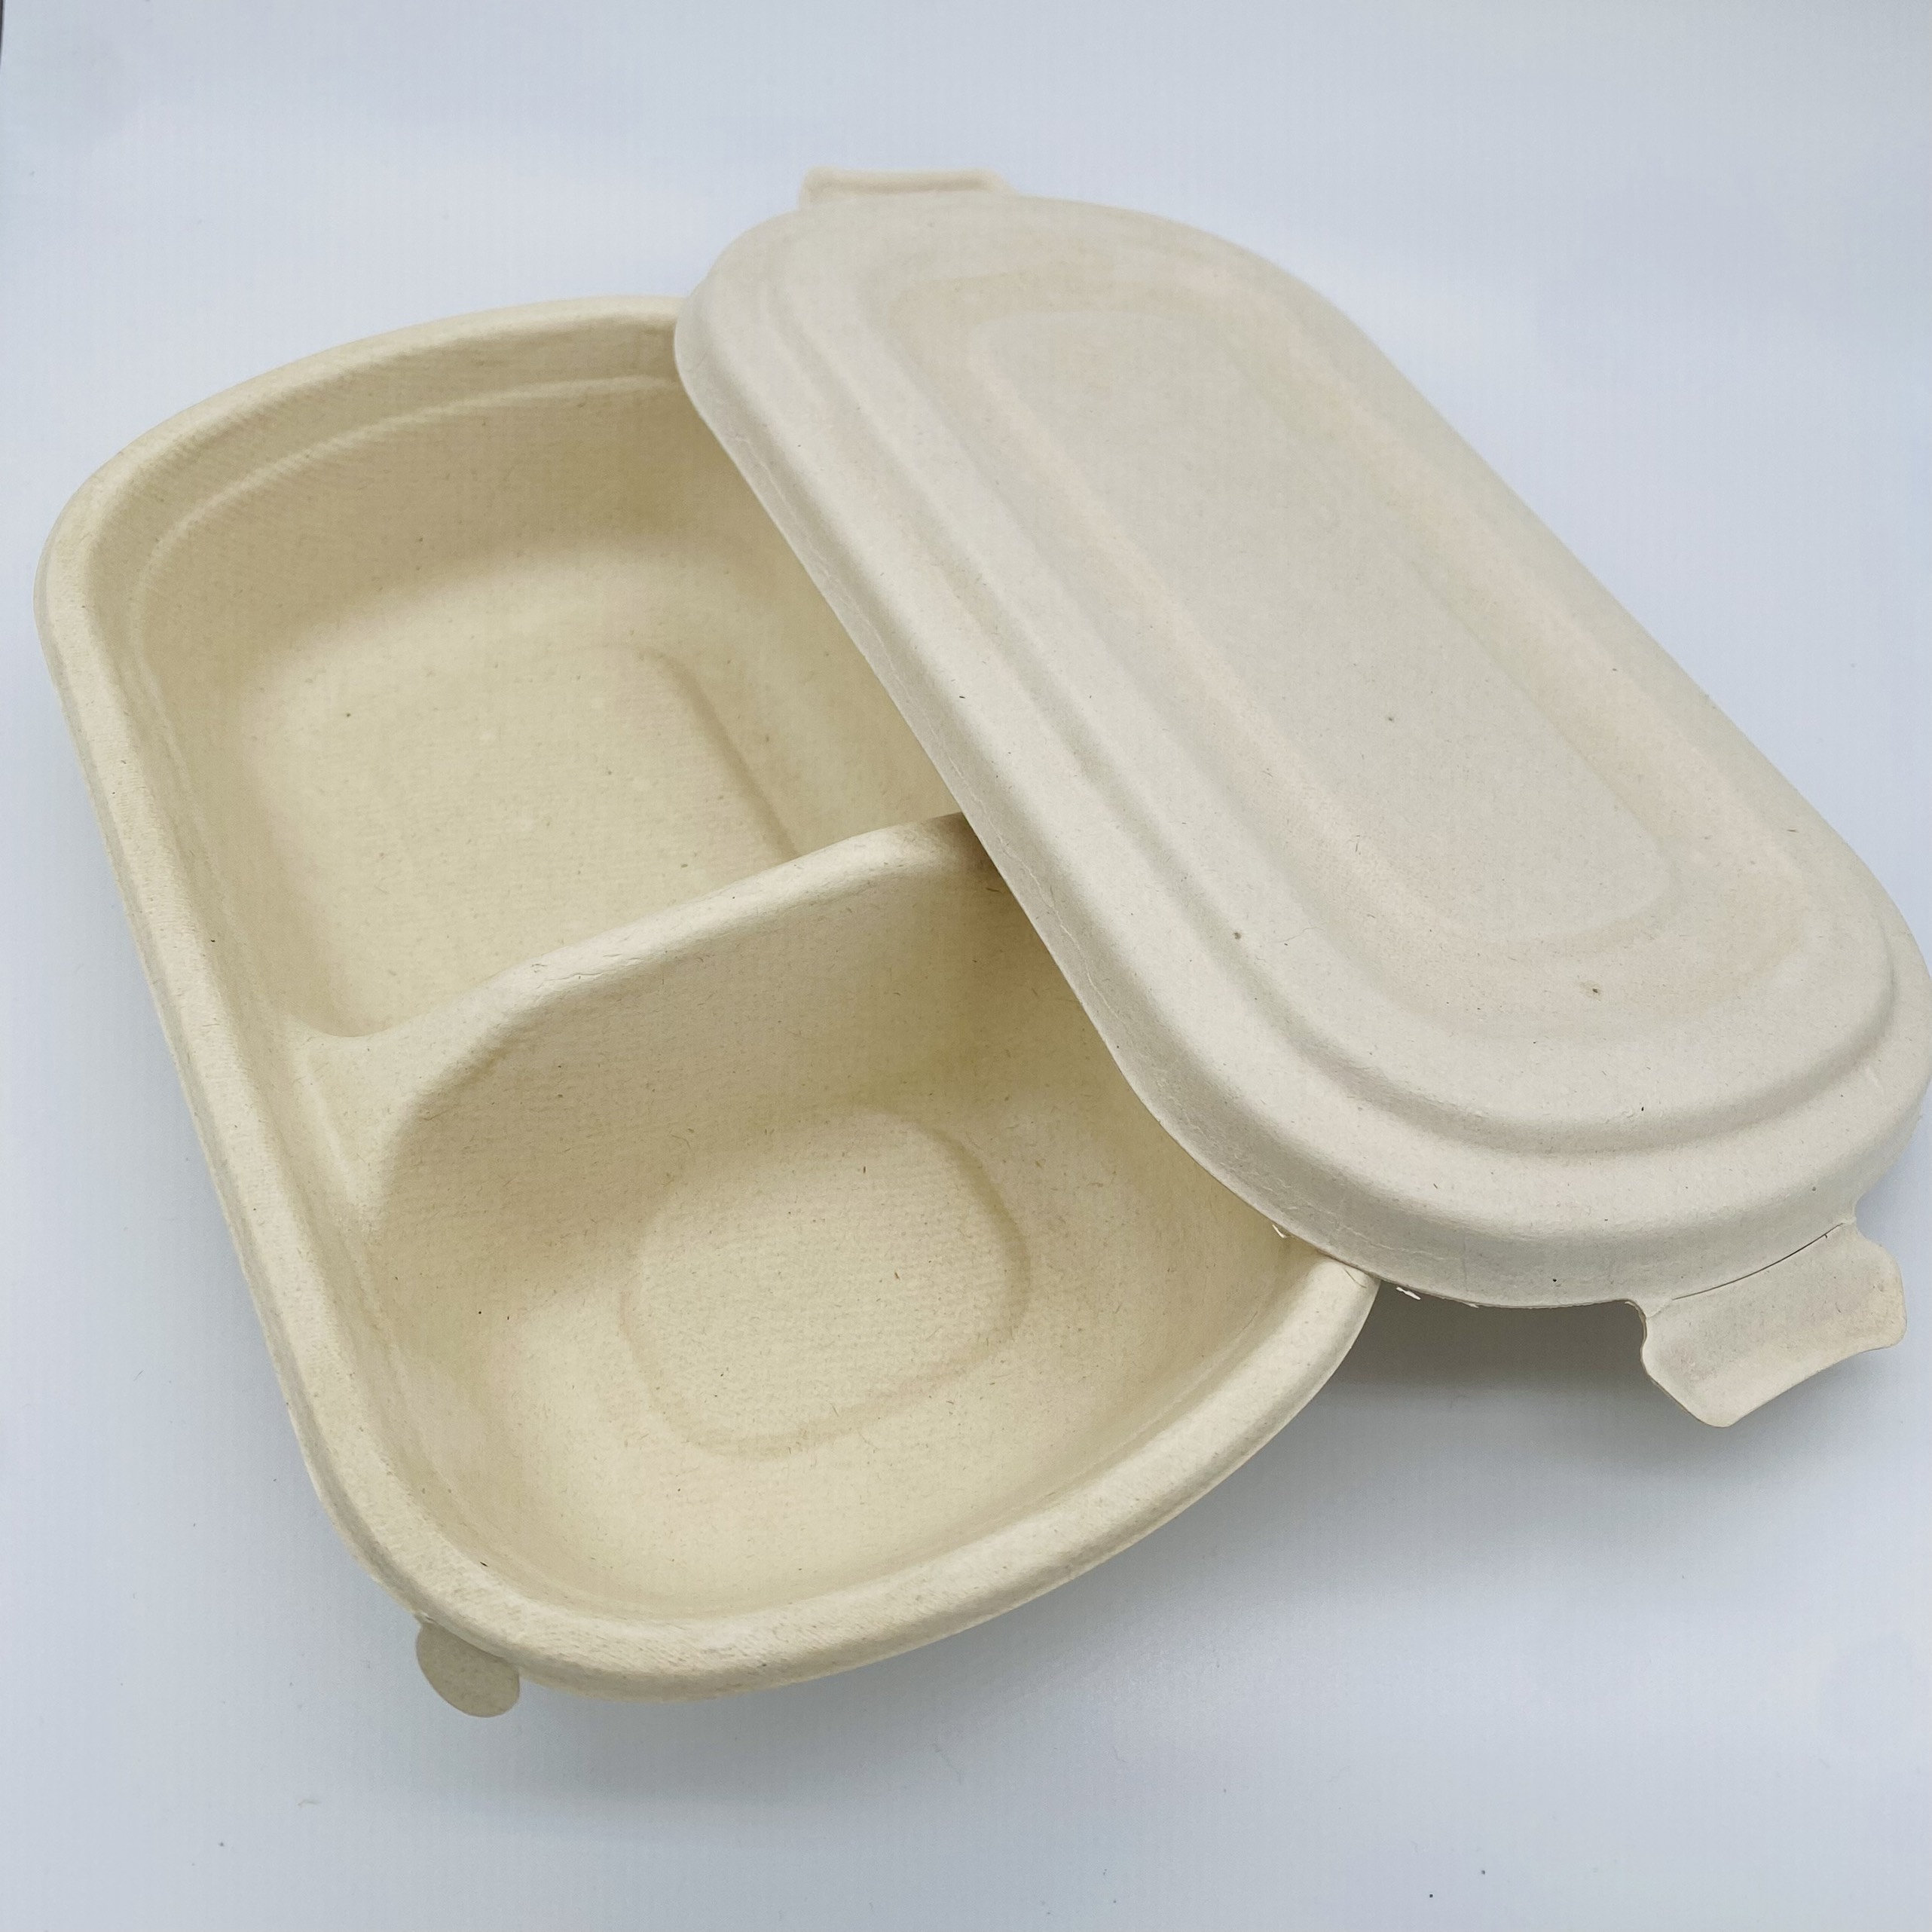 100% Compostable Clamshell Take Out Food Containers [6x6 50-Pack]  Heavy-Duty Quality to go Containers, Natural Disposable Bagasse,  Eco-Friendly Biodegradable Made of Sugar Cane Fibers - No Plastic Drinks